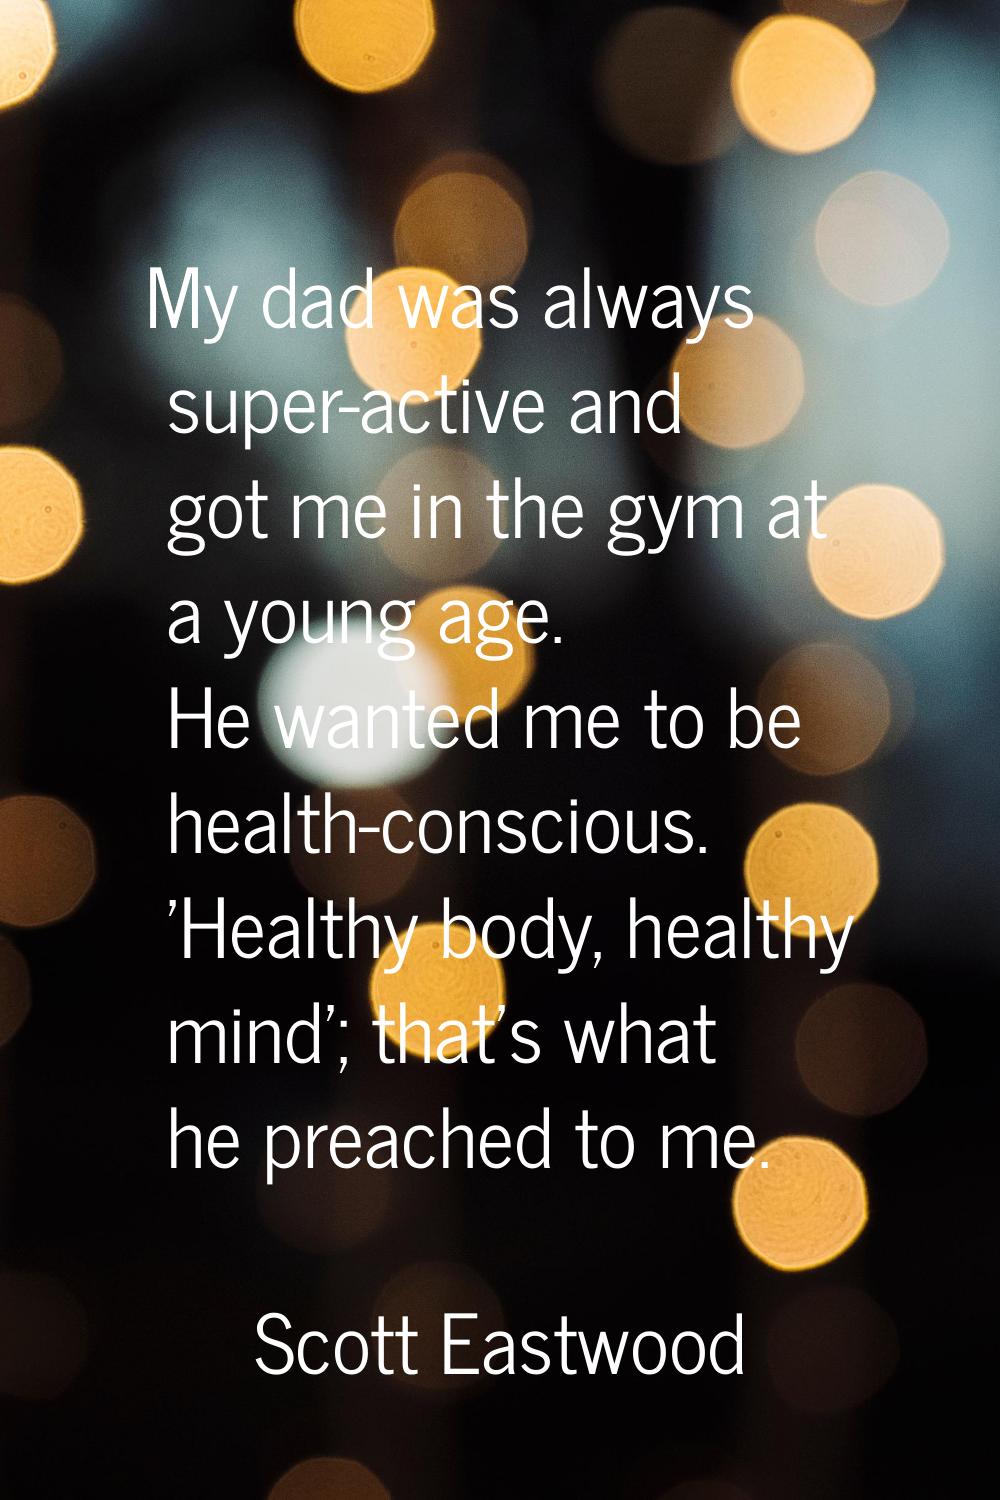 My dad was always super-active and got me in the gym at a young age. He wanted me to be health-cons